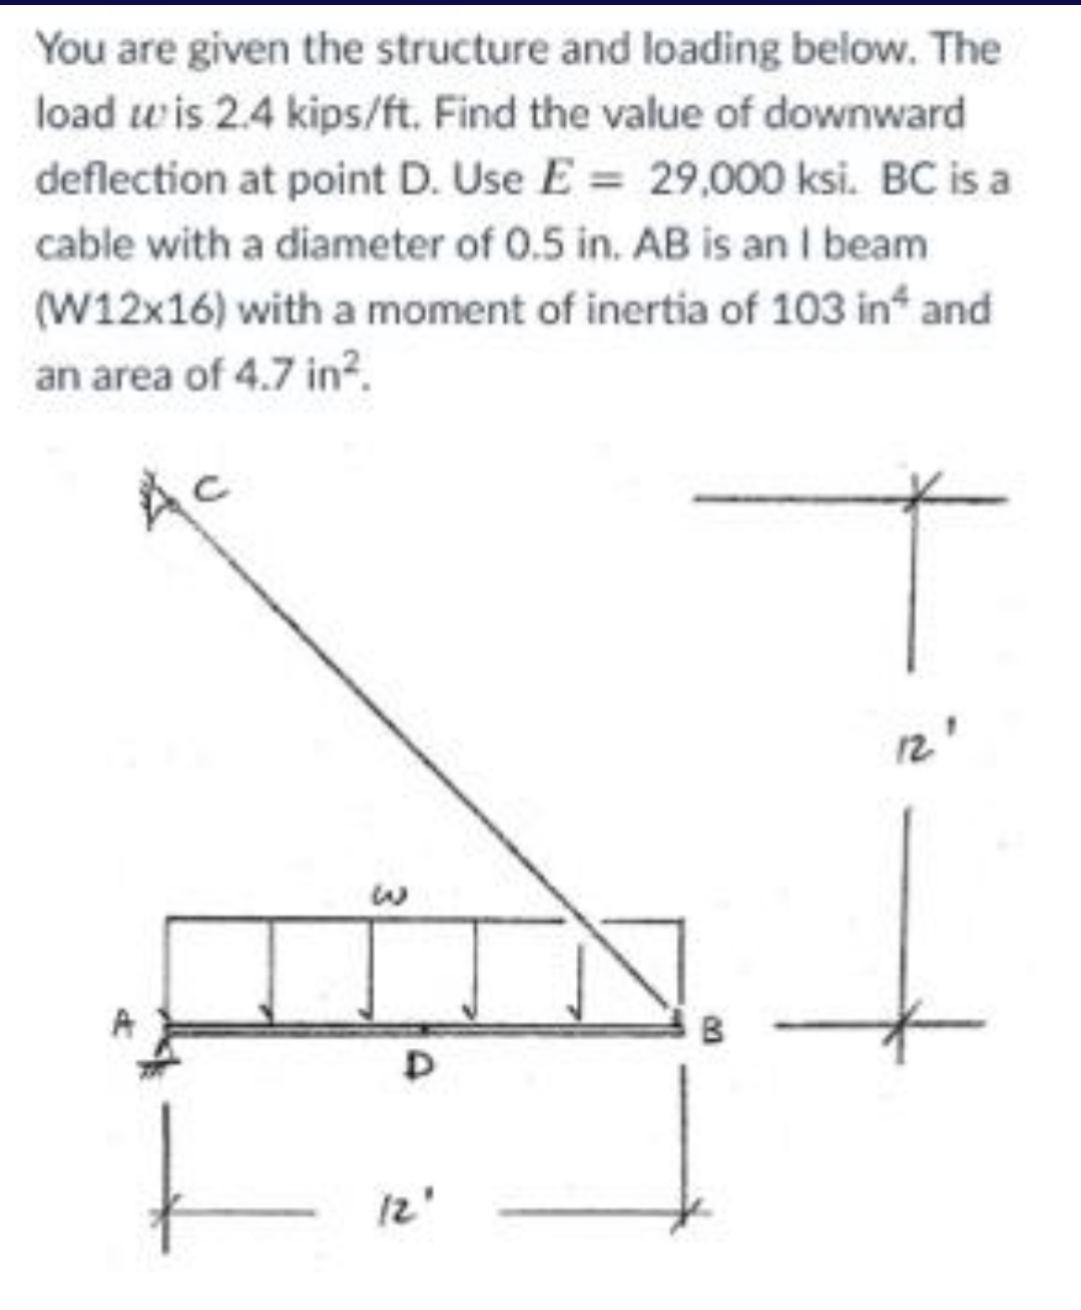 You are given the structure and loading below. The
load wis 2.4 kips/ft. Find the value of downward
deflection at point D. Use E = 29,000 ksi. BC is a
cable with a diameter of 0.5 in. AB is an I beam
(W12x16) with a moment of inertia of 103 in* and
an area of 4.7 in².
AC
3
D
12'
B
12.1